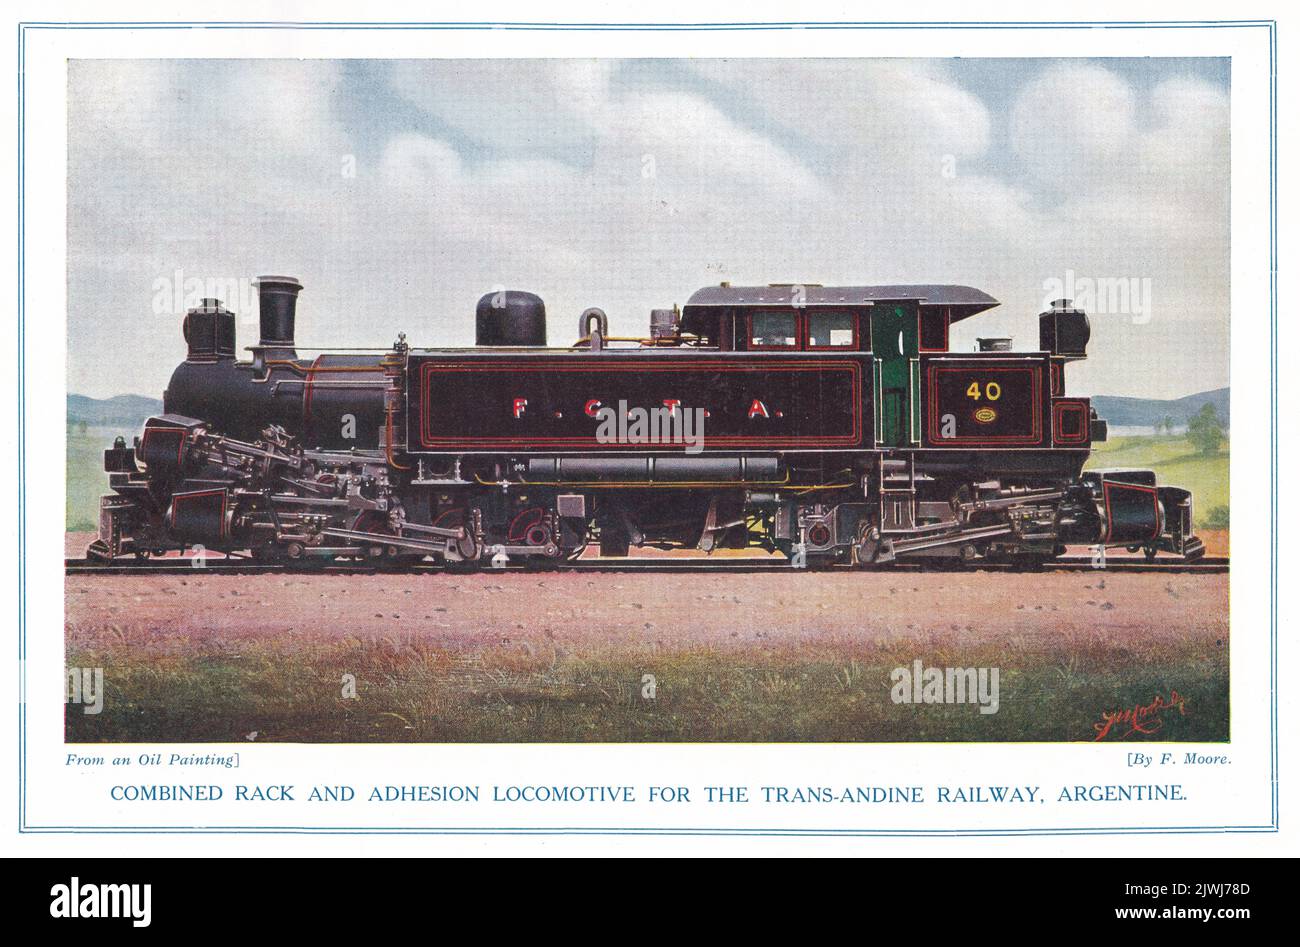 Combined Rack and Adhesion Locomotive for the Trans-Andine Railway, Argentine. Stock Photo